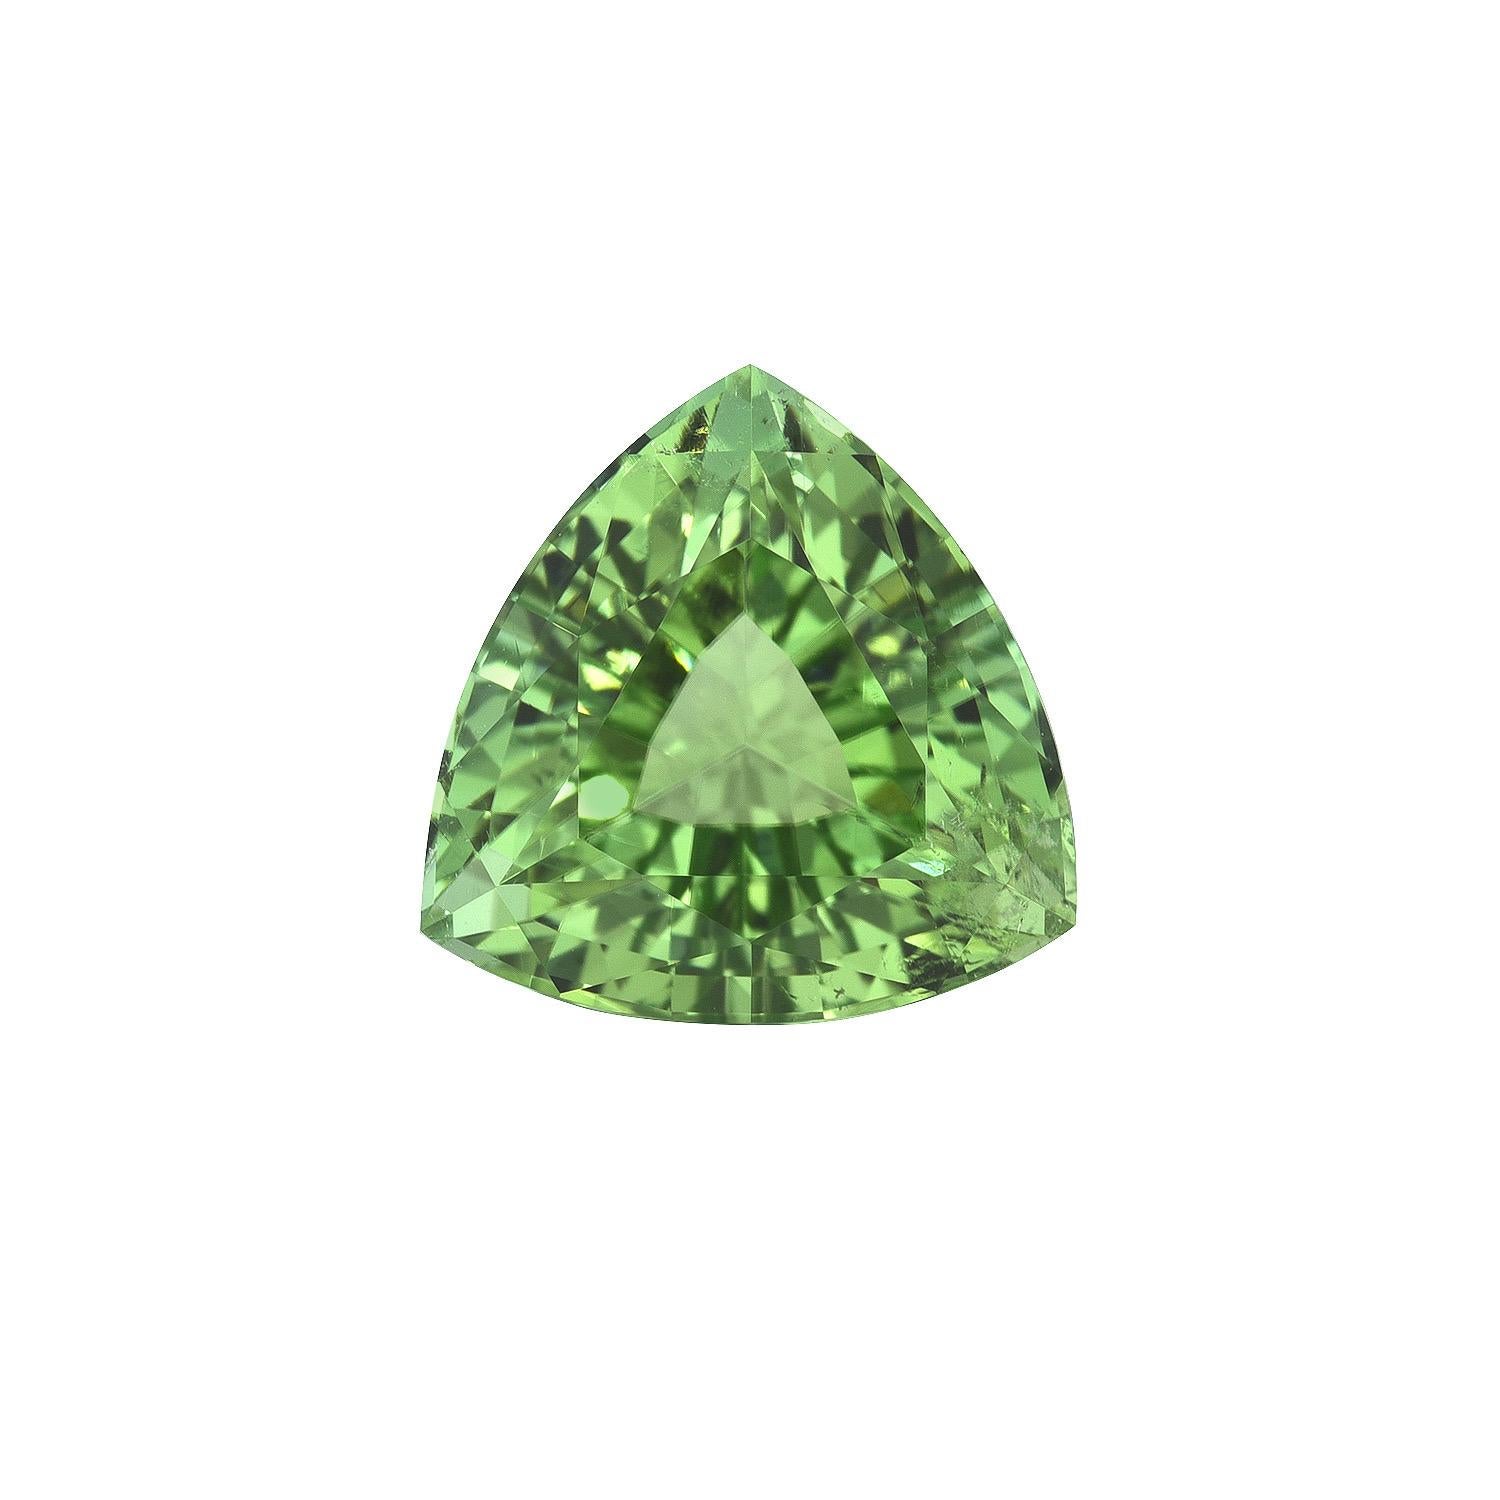 Contemporary Mint Green Tourmaline Ring Gem 4.52 Carat Unmounted Trillion Loose Gemstone For Sale